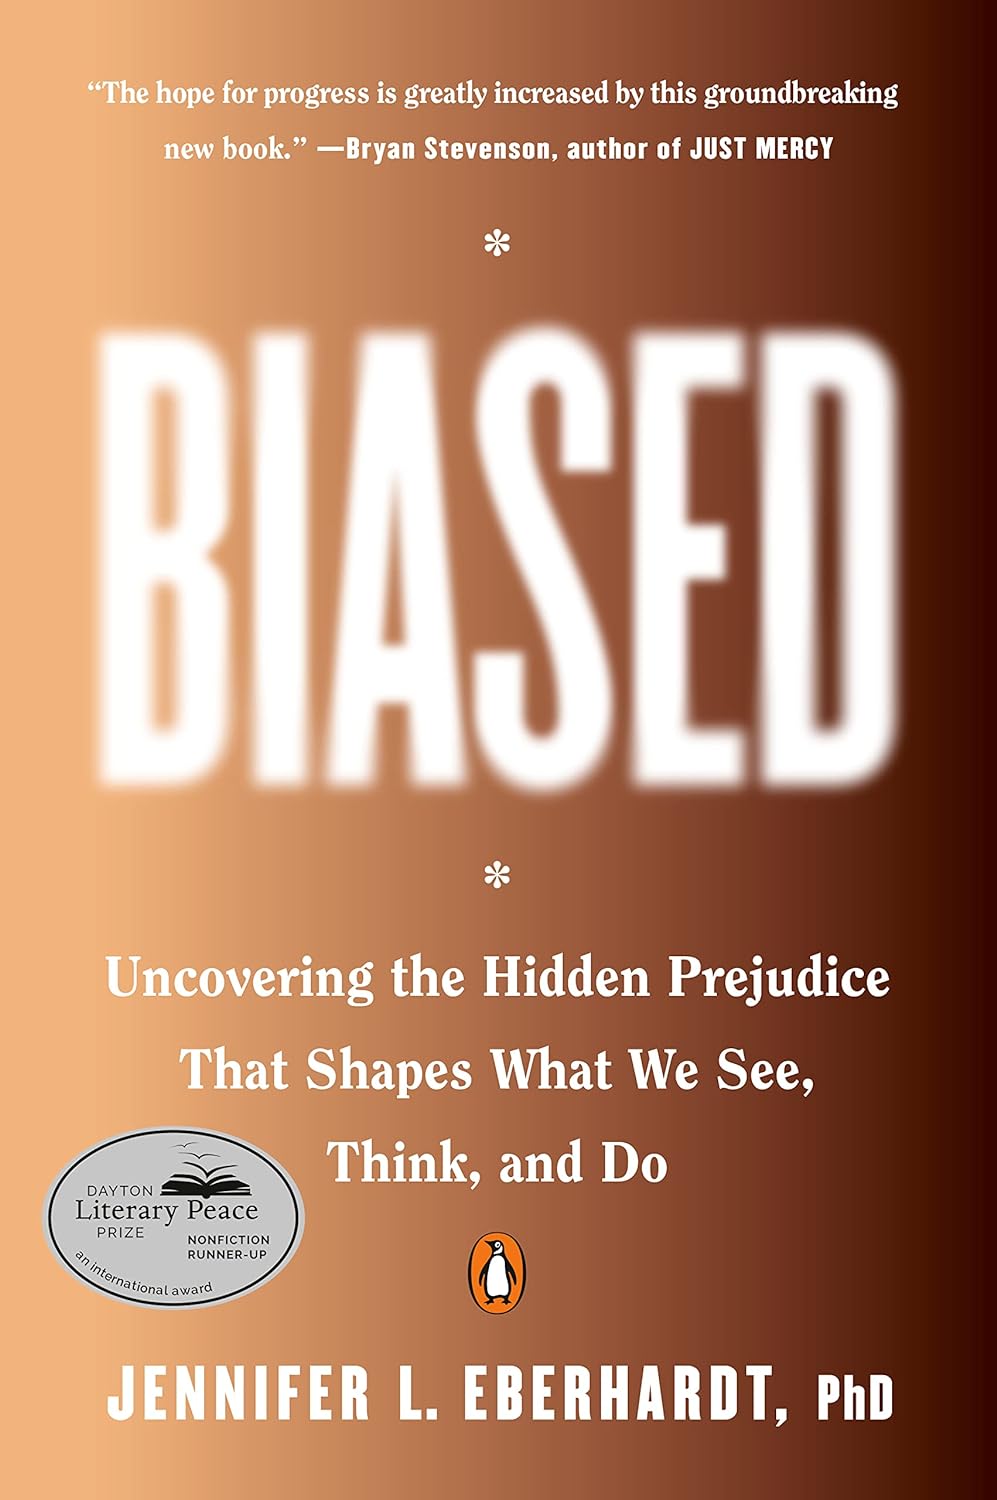 Biased Uncovering the Hidden Prejudice That Shapes What We See, Think, and Do by Jennifer L. Eberhardt